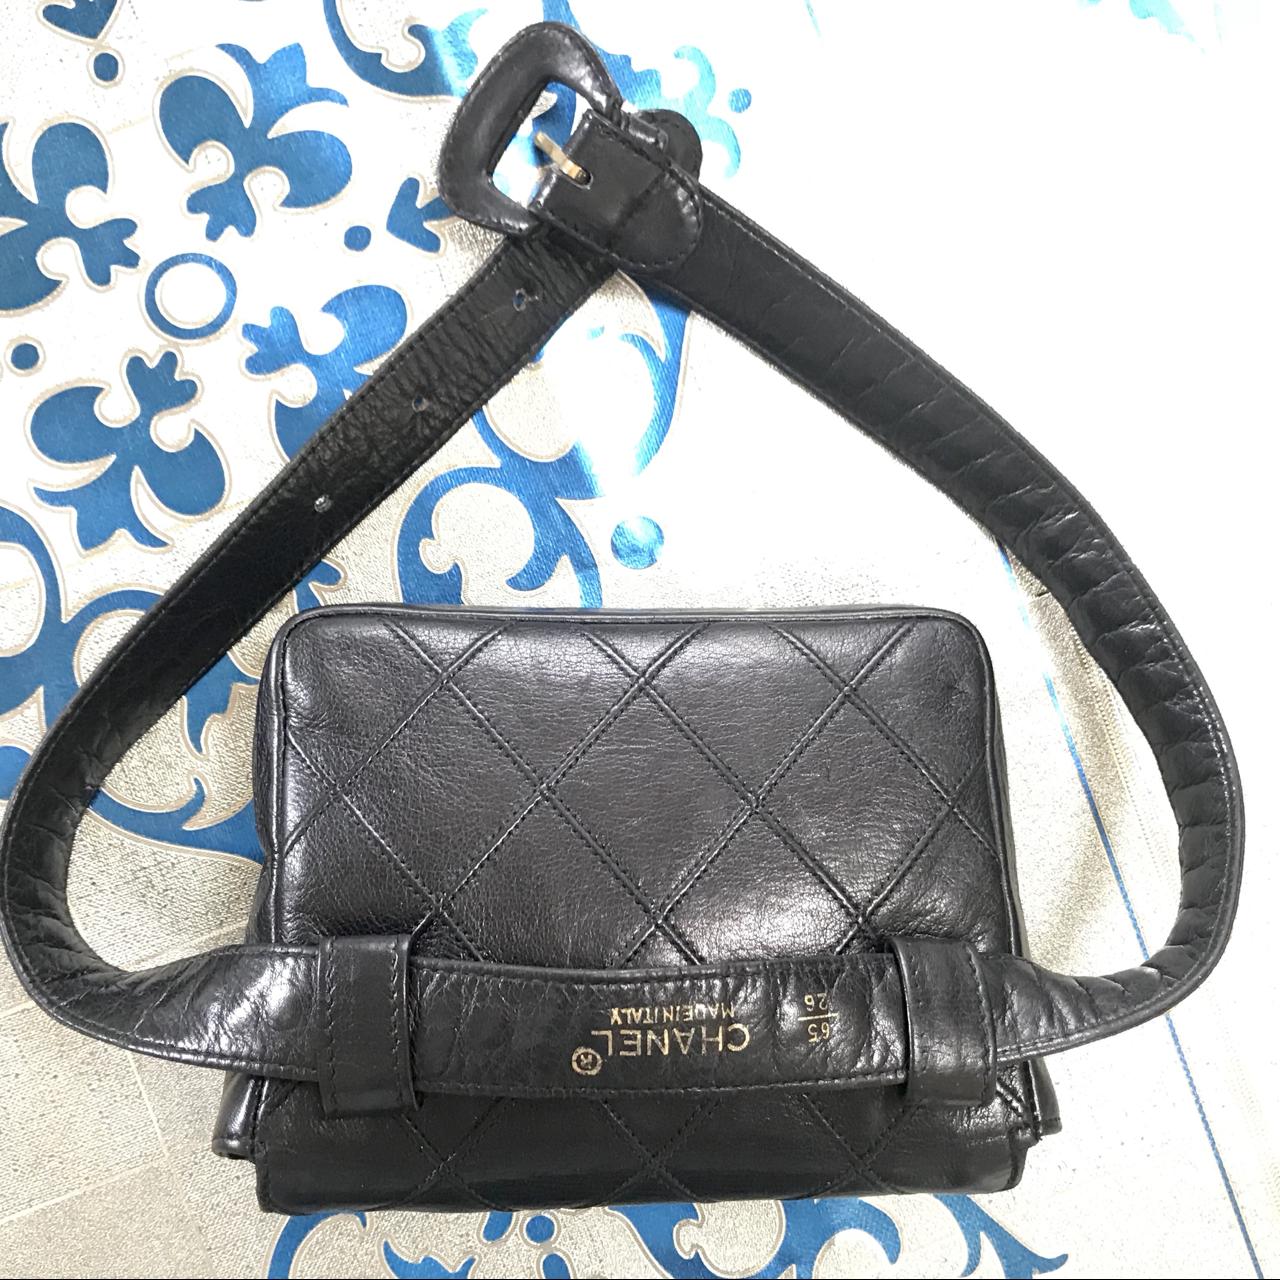 Pre-owned Chanel Vintage Black Lamb Belt Bag, Fanny Pack With Golden Chain  Belt & Cc Closure. Good For Waist S In Grey